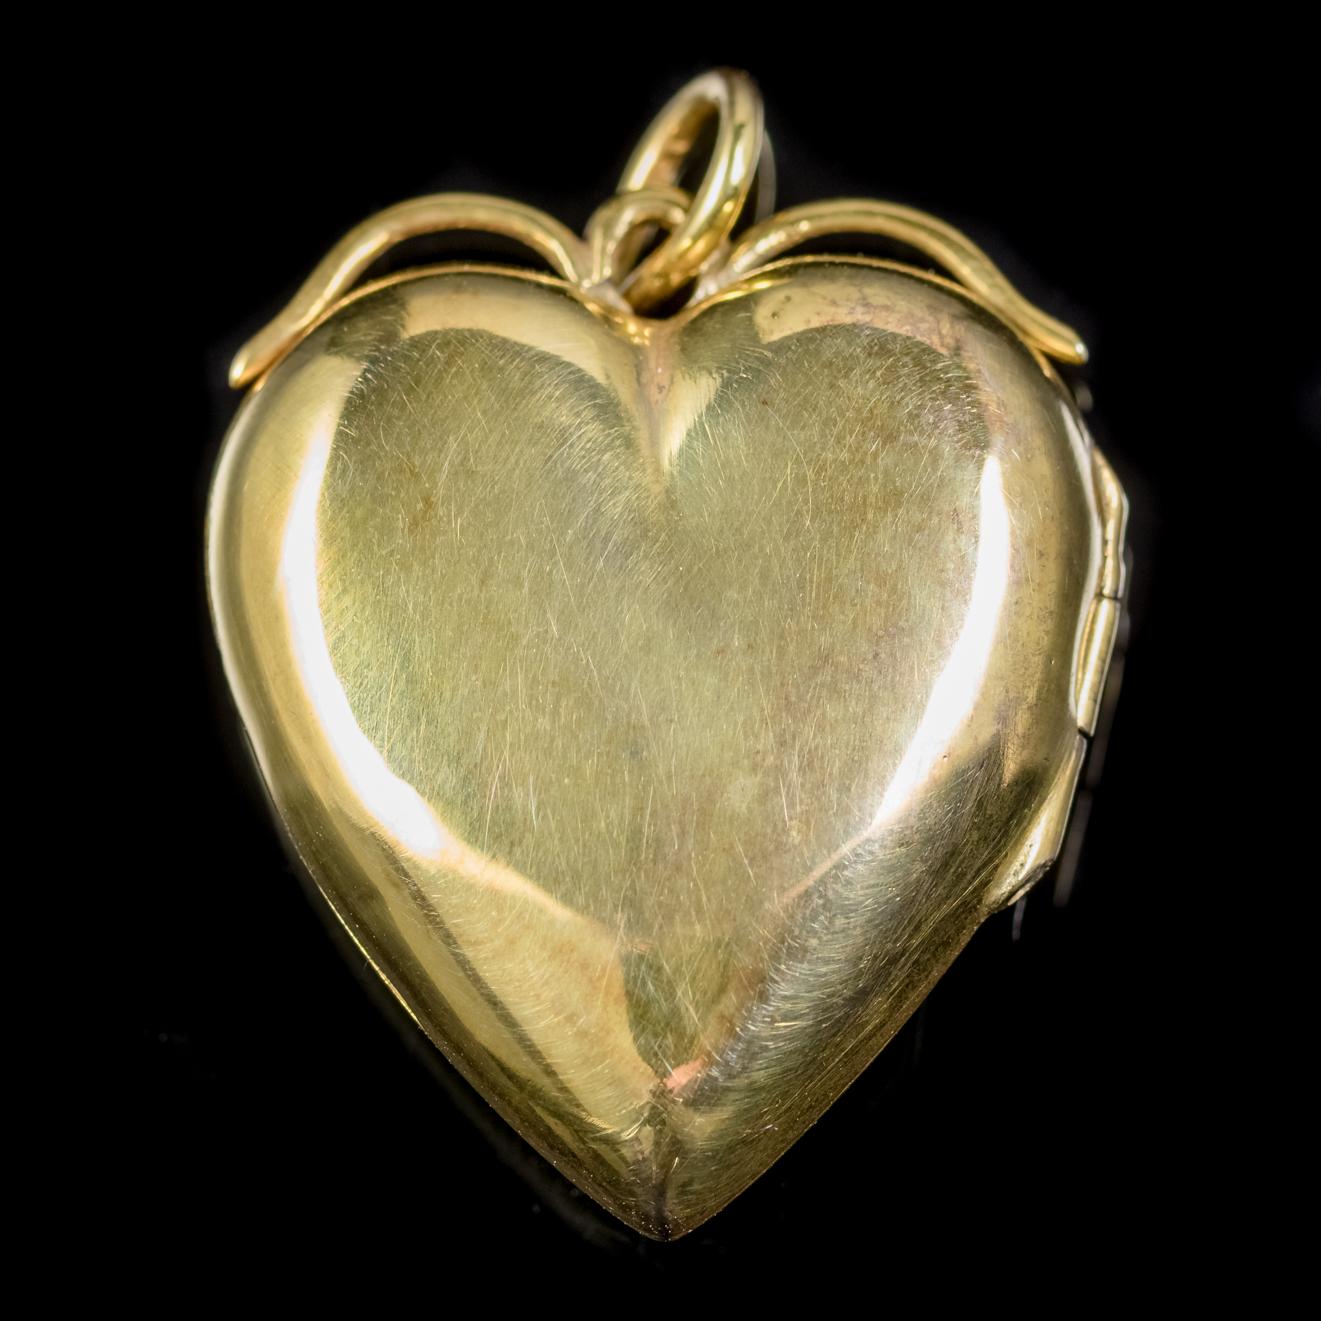 A sweet antique Victorian heart locket C. 1900, set with a lovely 0.10ct natural Opal in the centre surrounded by six sparkling Diamonds, approx. 0.12ct in total. 

The lovely natural Opal is a kaleidoscope of rainbow colours shimmering and changing